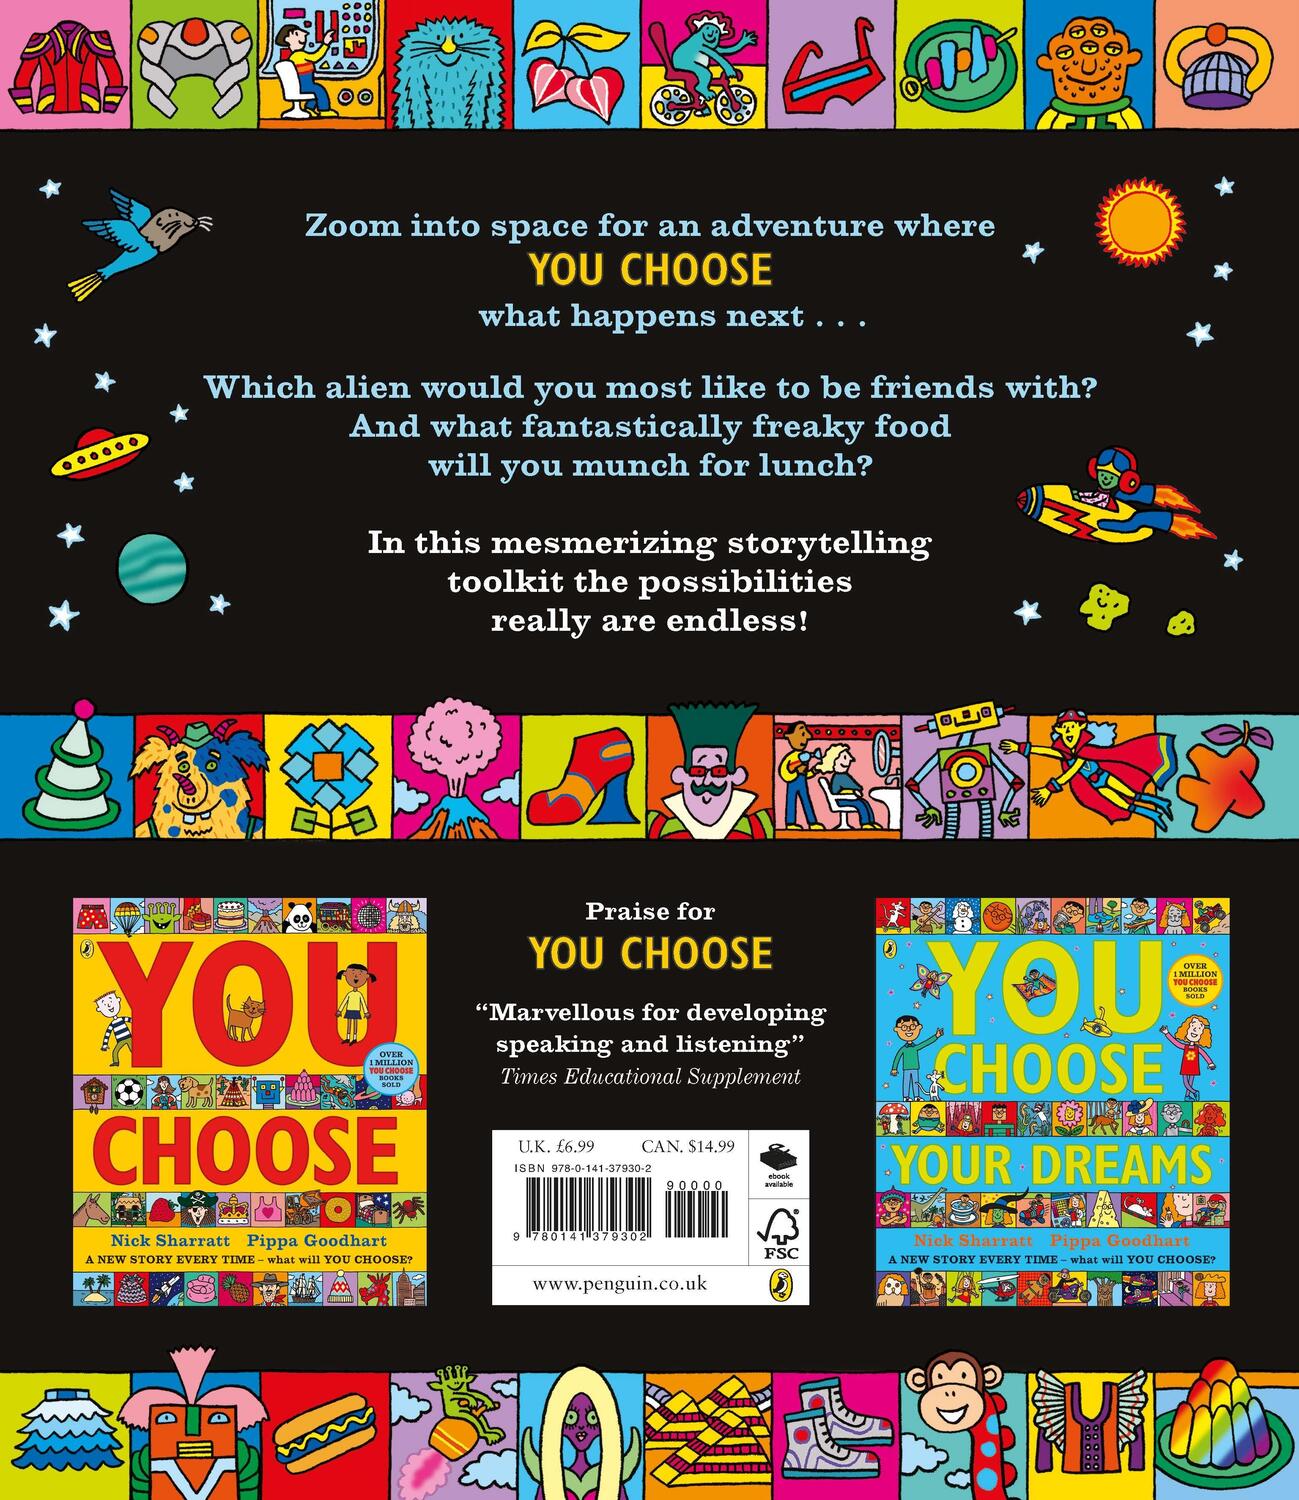 Rückseite: 9780141379302 | You Choose in Space | A new story every time - what will YOU choose?